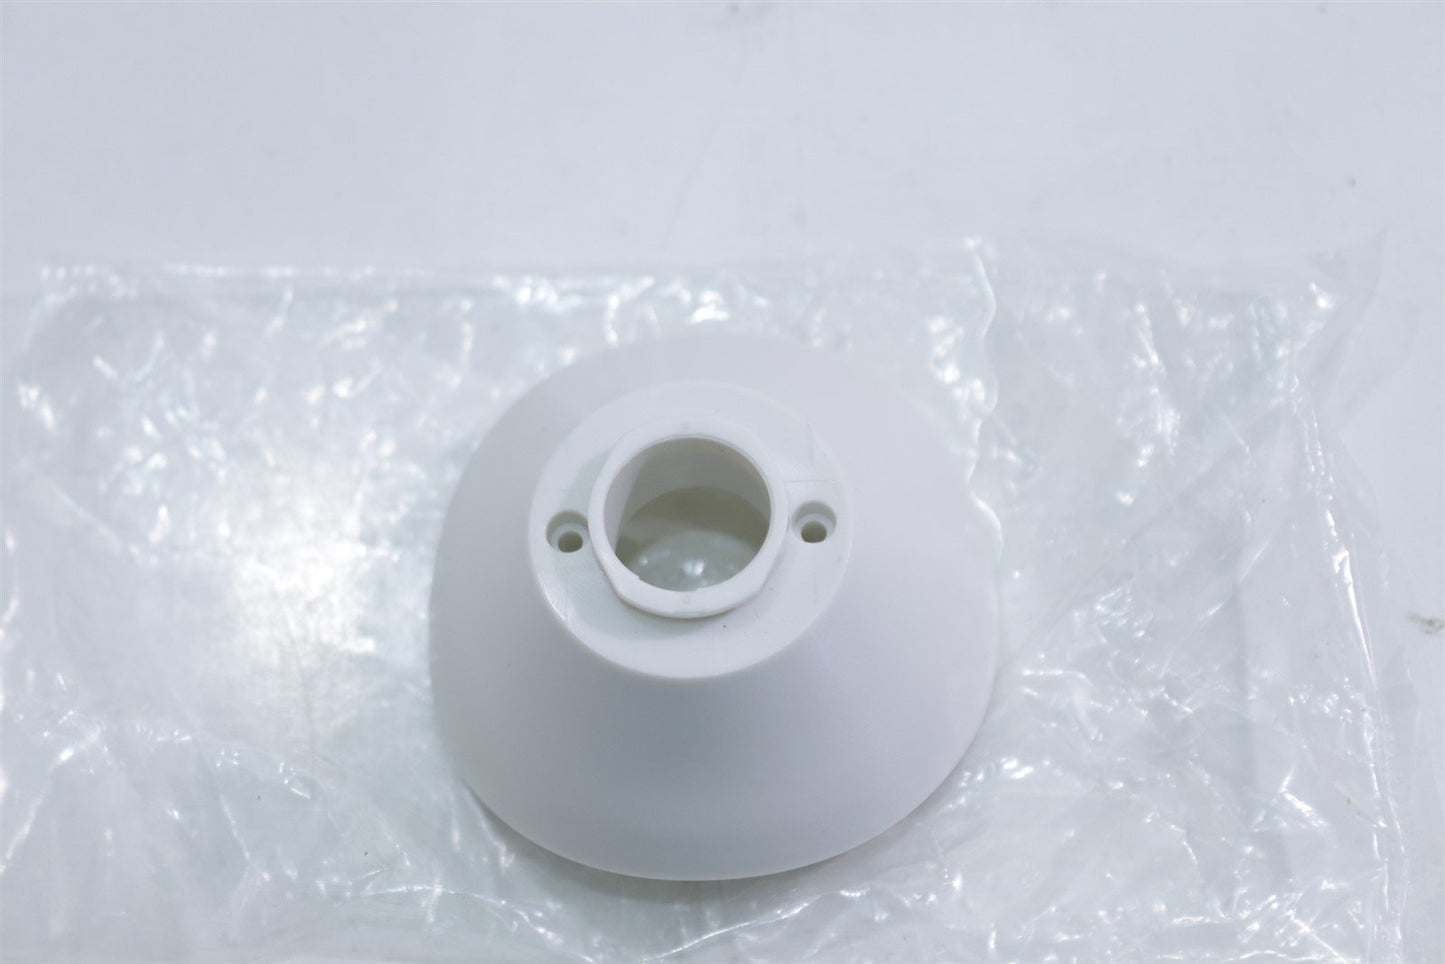 Alma Lasers Plastic Cover For Facial Tip Handpiece Window